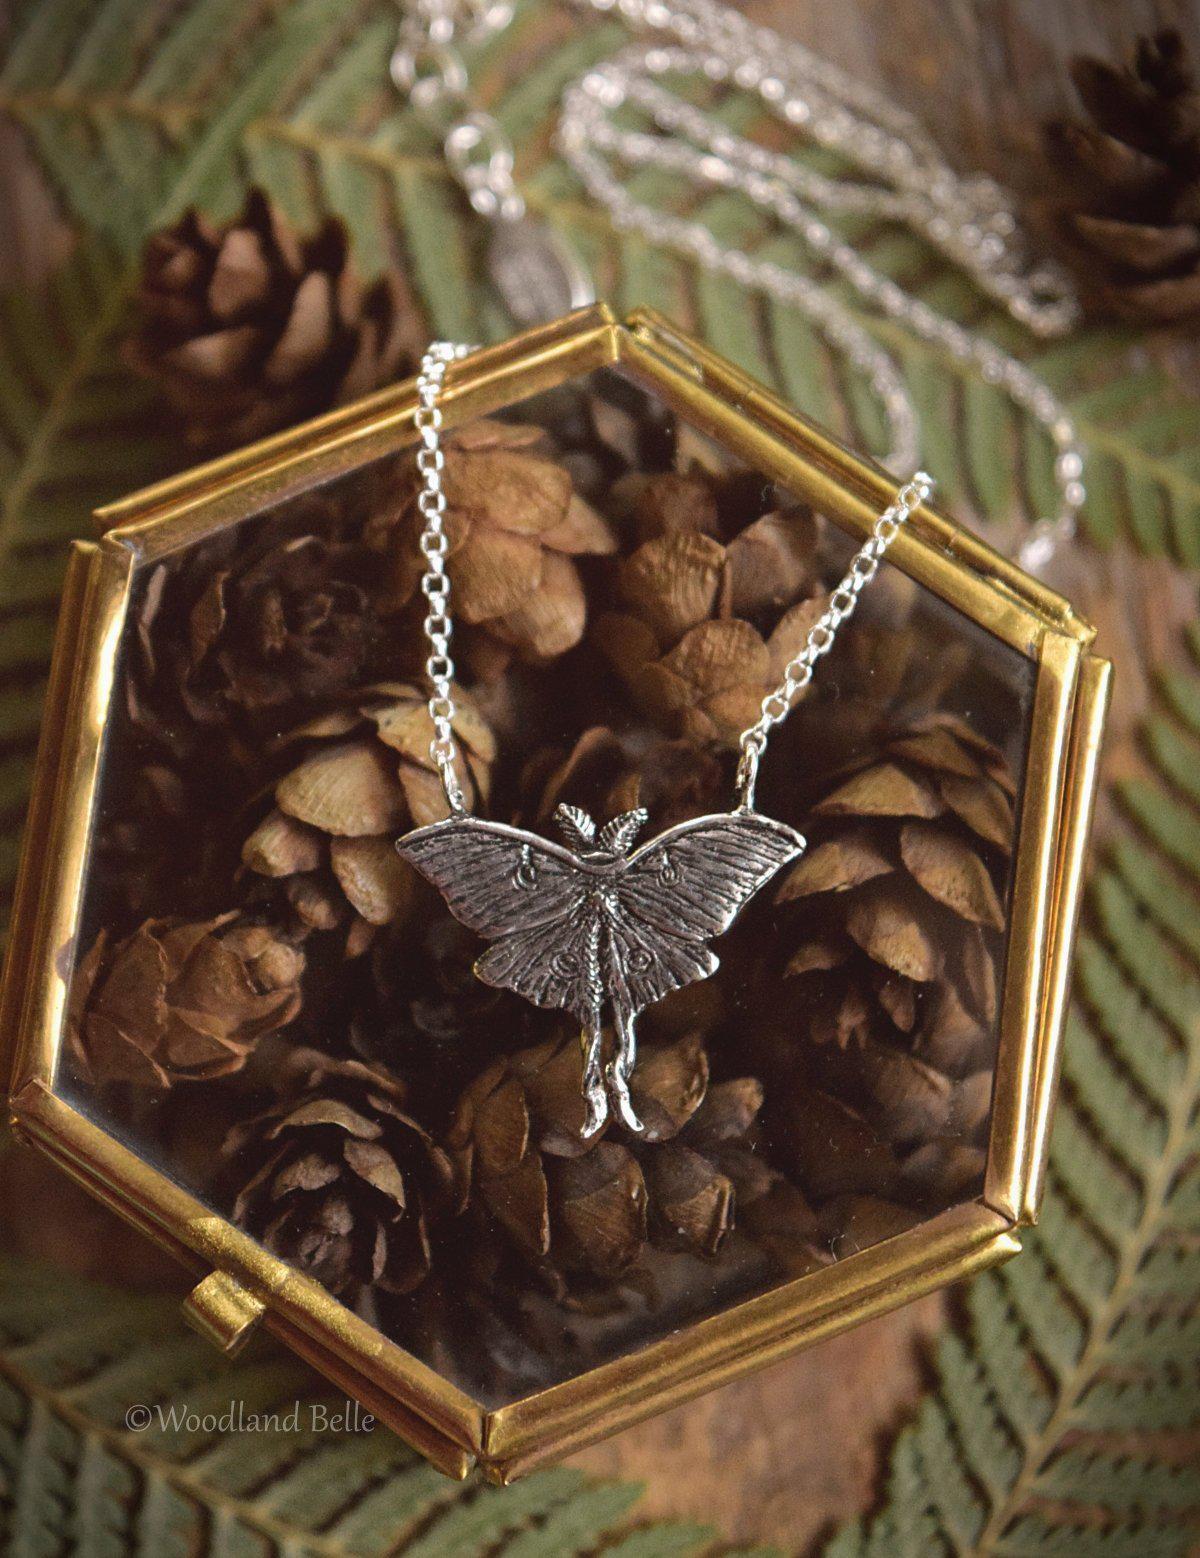 Luna Moth Necklace - Sterling Silver Moon Moth Pendant, Recycled - Small, Dainty Luna Moth Charm - Moth Lover Jewelry Gift by Woodland Belle